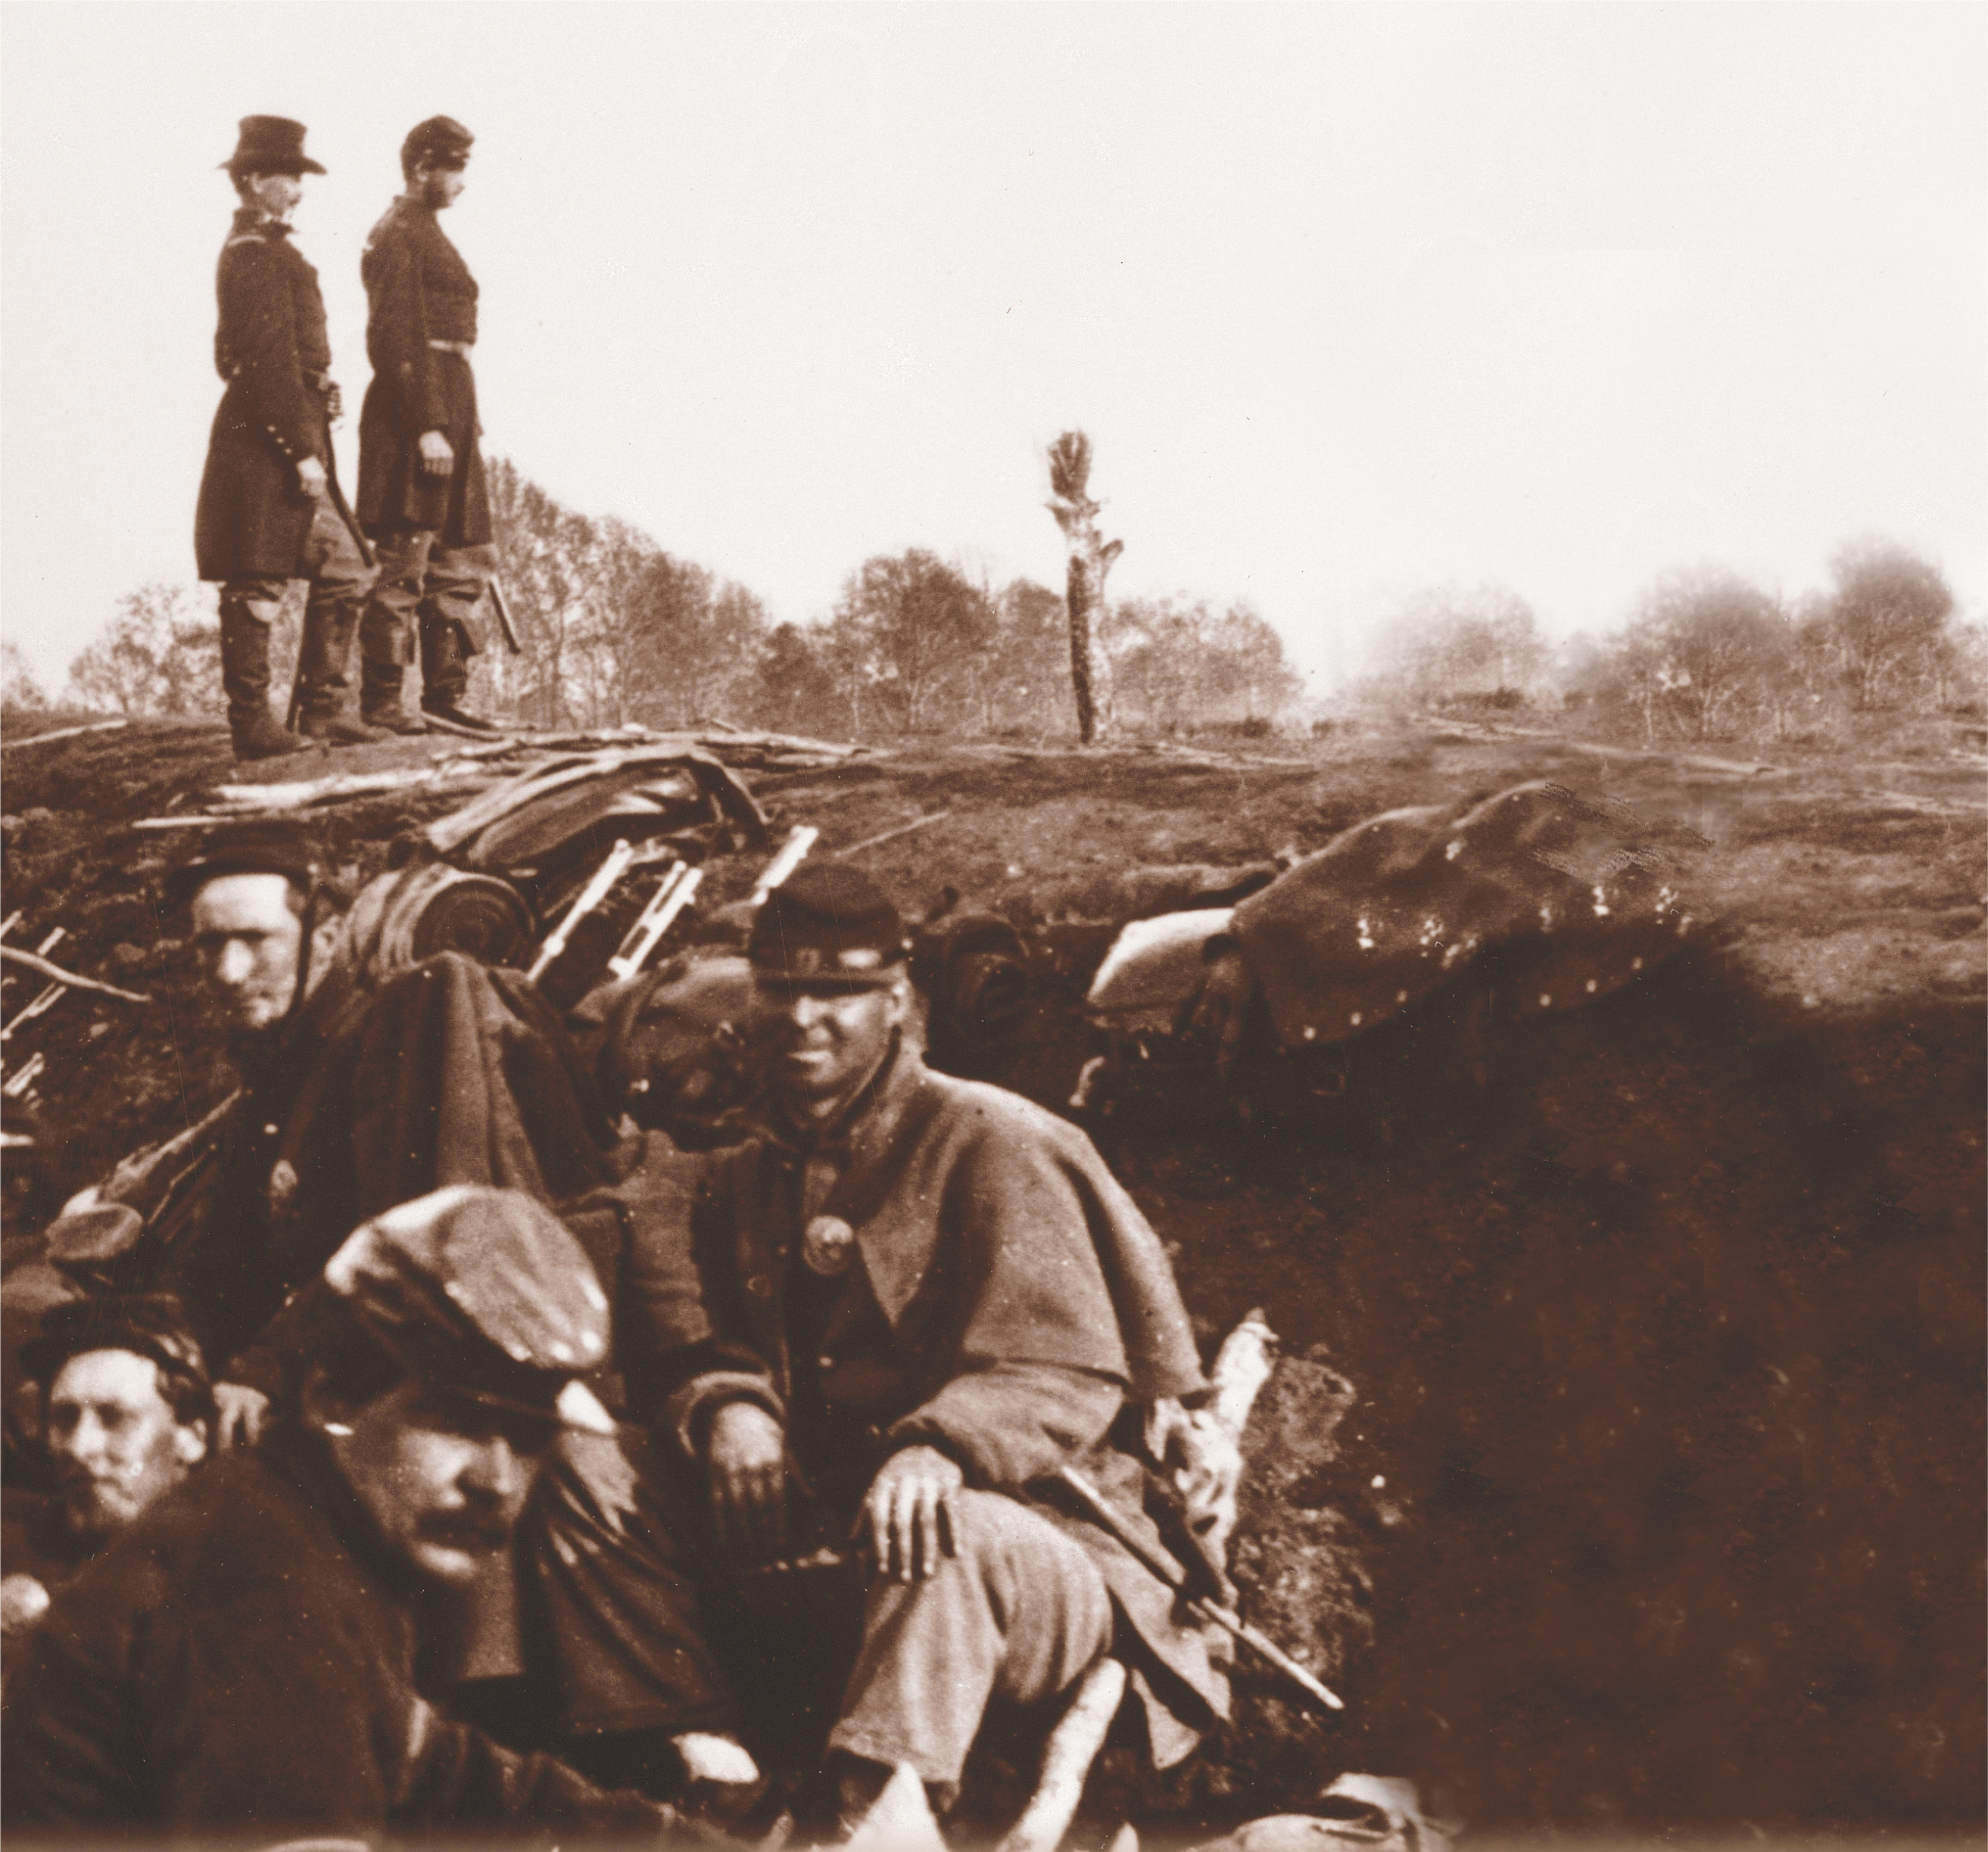 A photo shows dozens of Union soldiers crowded together in a trench.